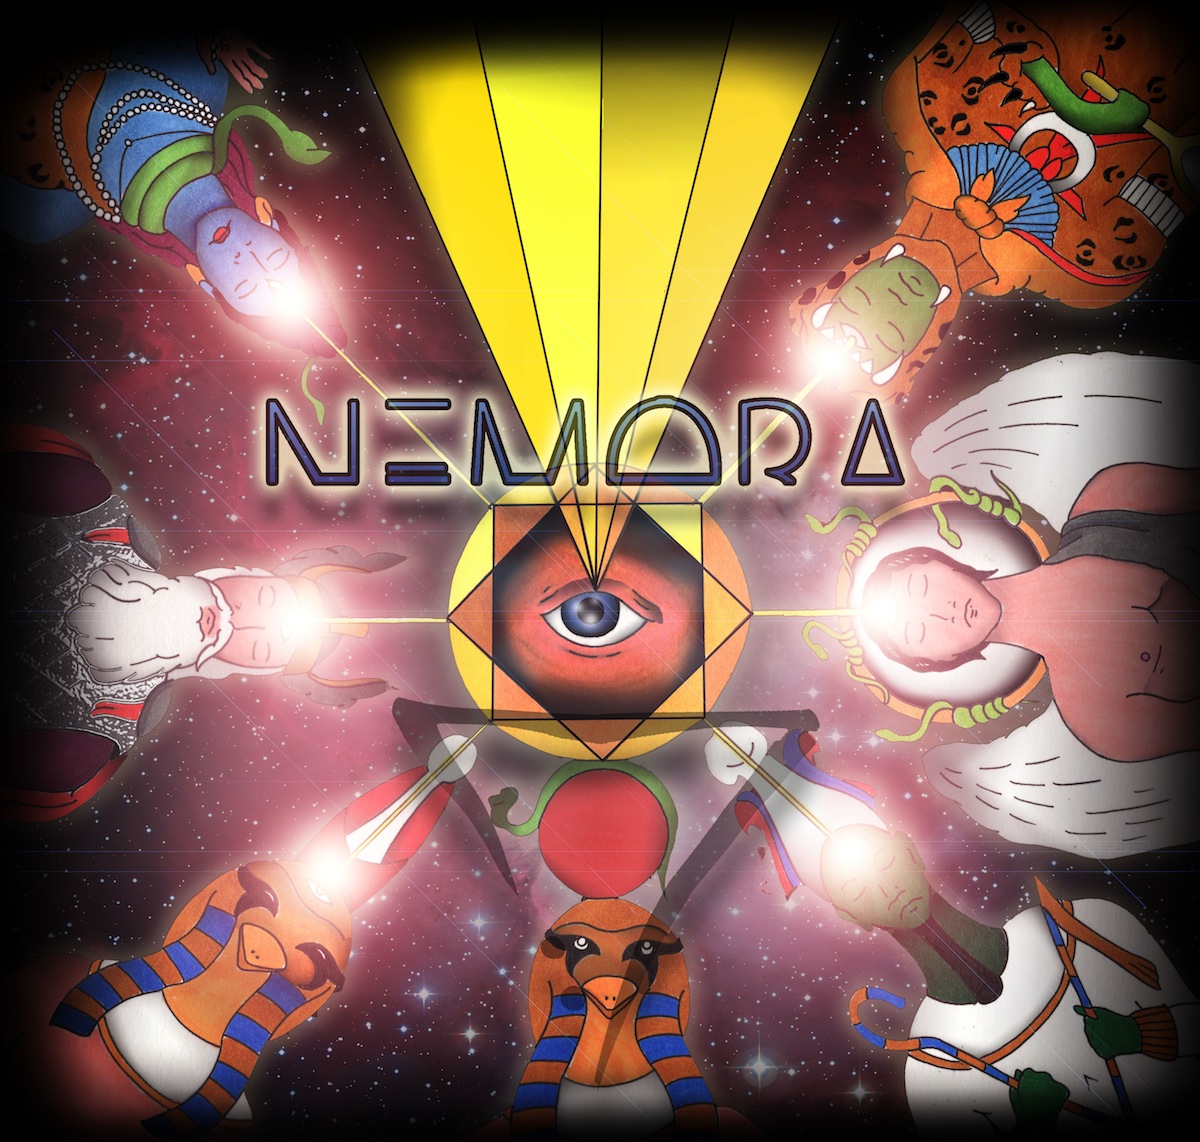 News Added Jun 12, 2012 Nemora strays from the norm with a unique blend of jazz and death metal. Submitted By Joe Ross Track list: Added Jun 12, 2012 01. Desolate 02. Sati 03. Equinox of the Gods 04. Vade Mecum 05. Pu Nemora 06. Blend 07. Parallel Time 08. Dandy Submitted By Joe Ross […]